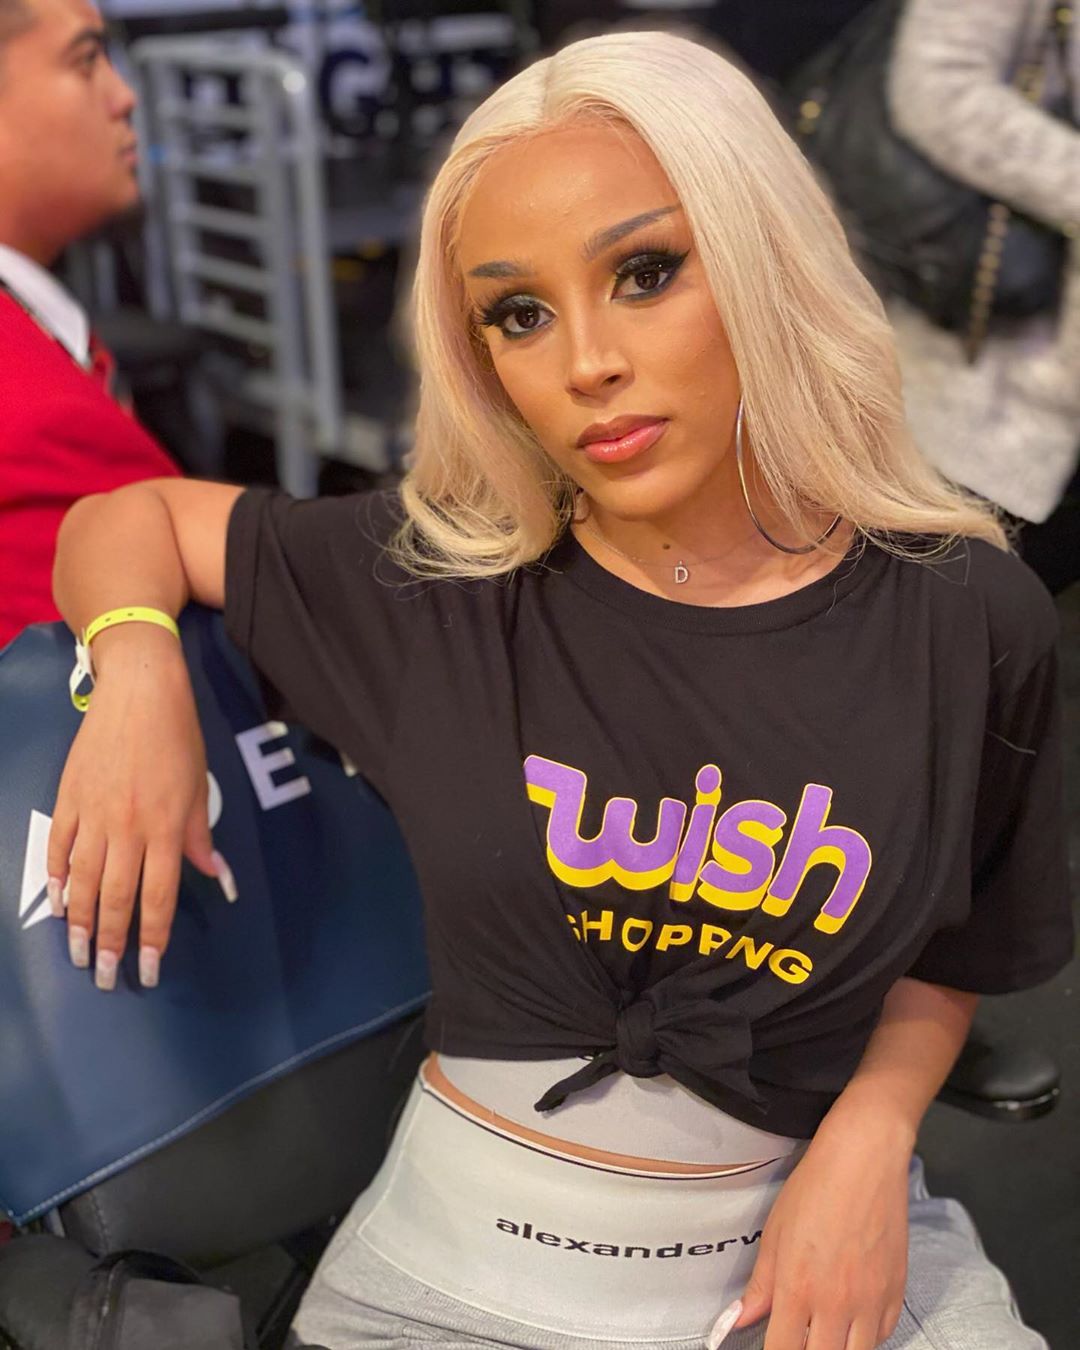 Doja Cat is the New Queen of Colorful Wigs